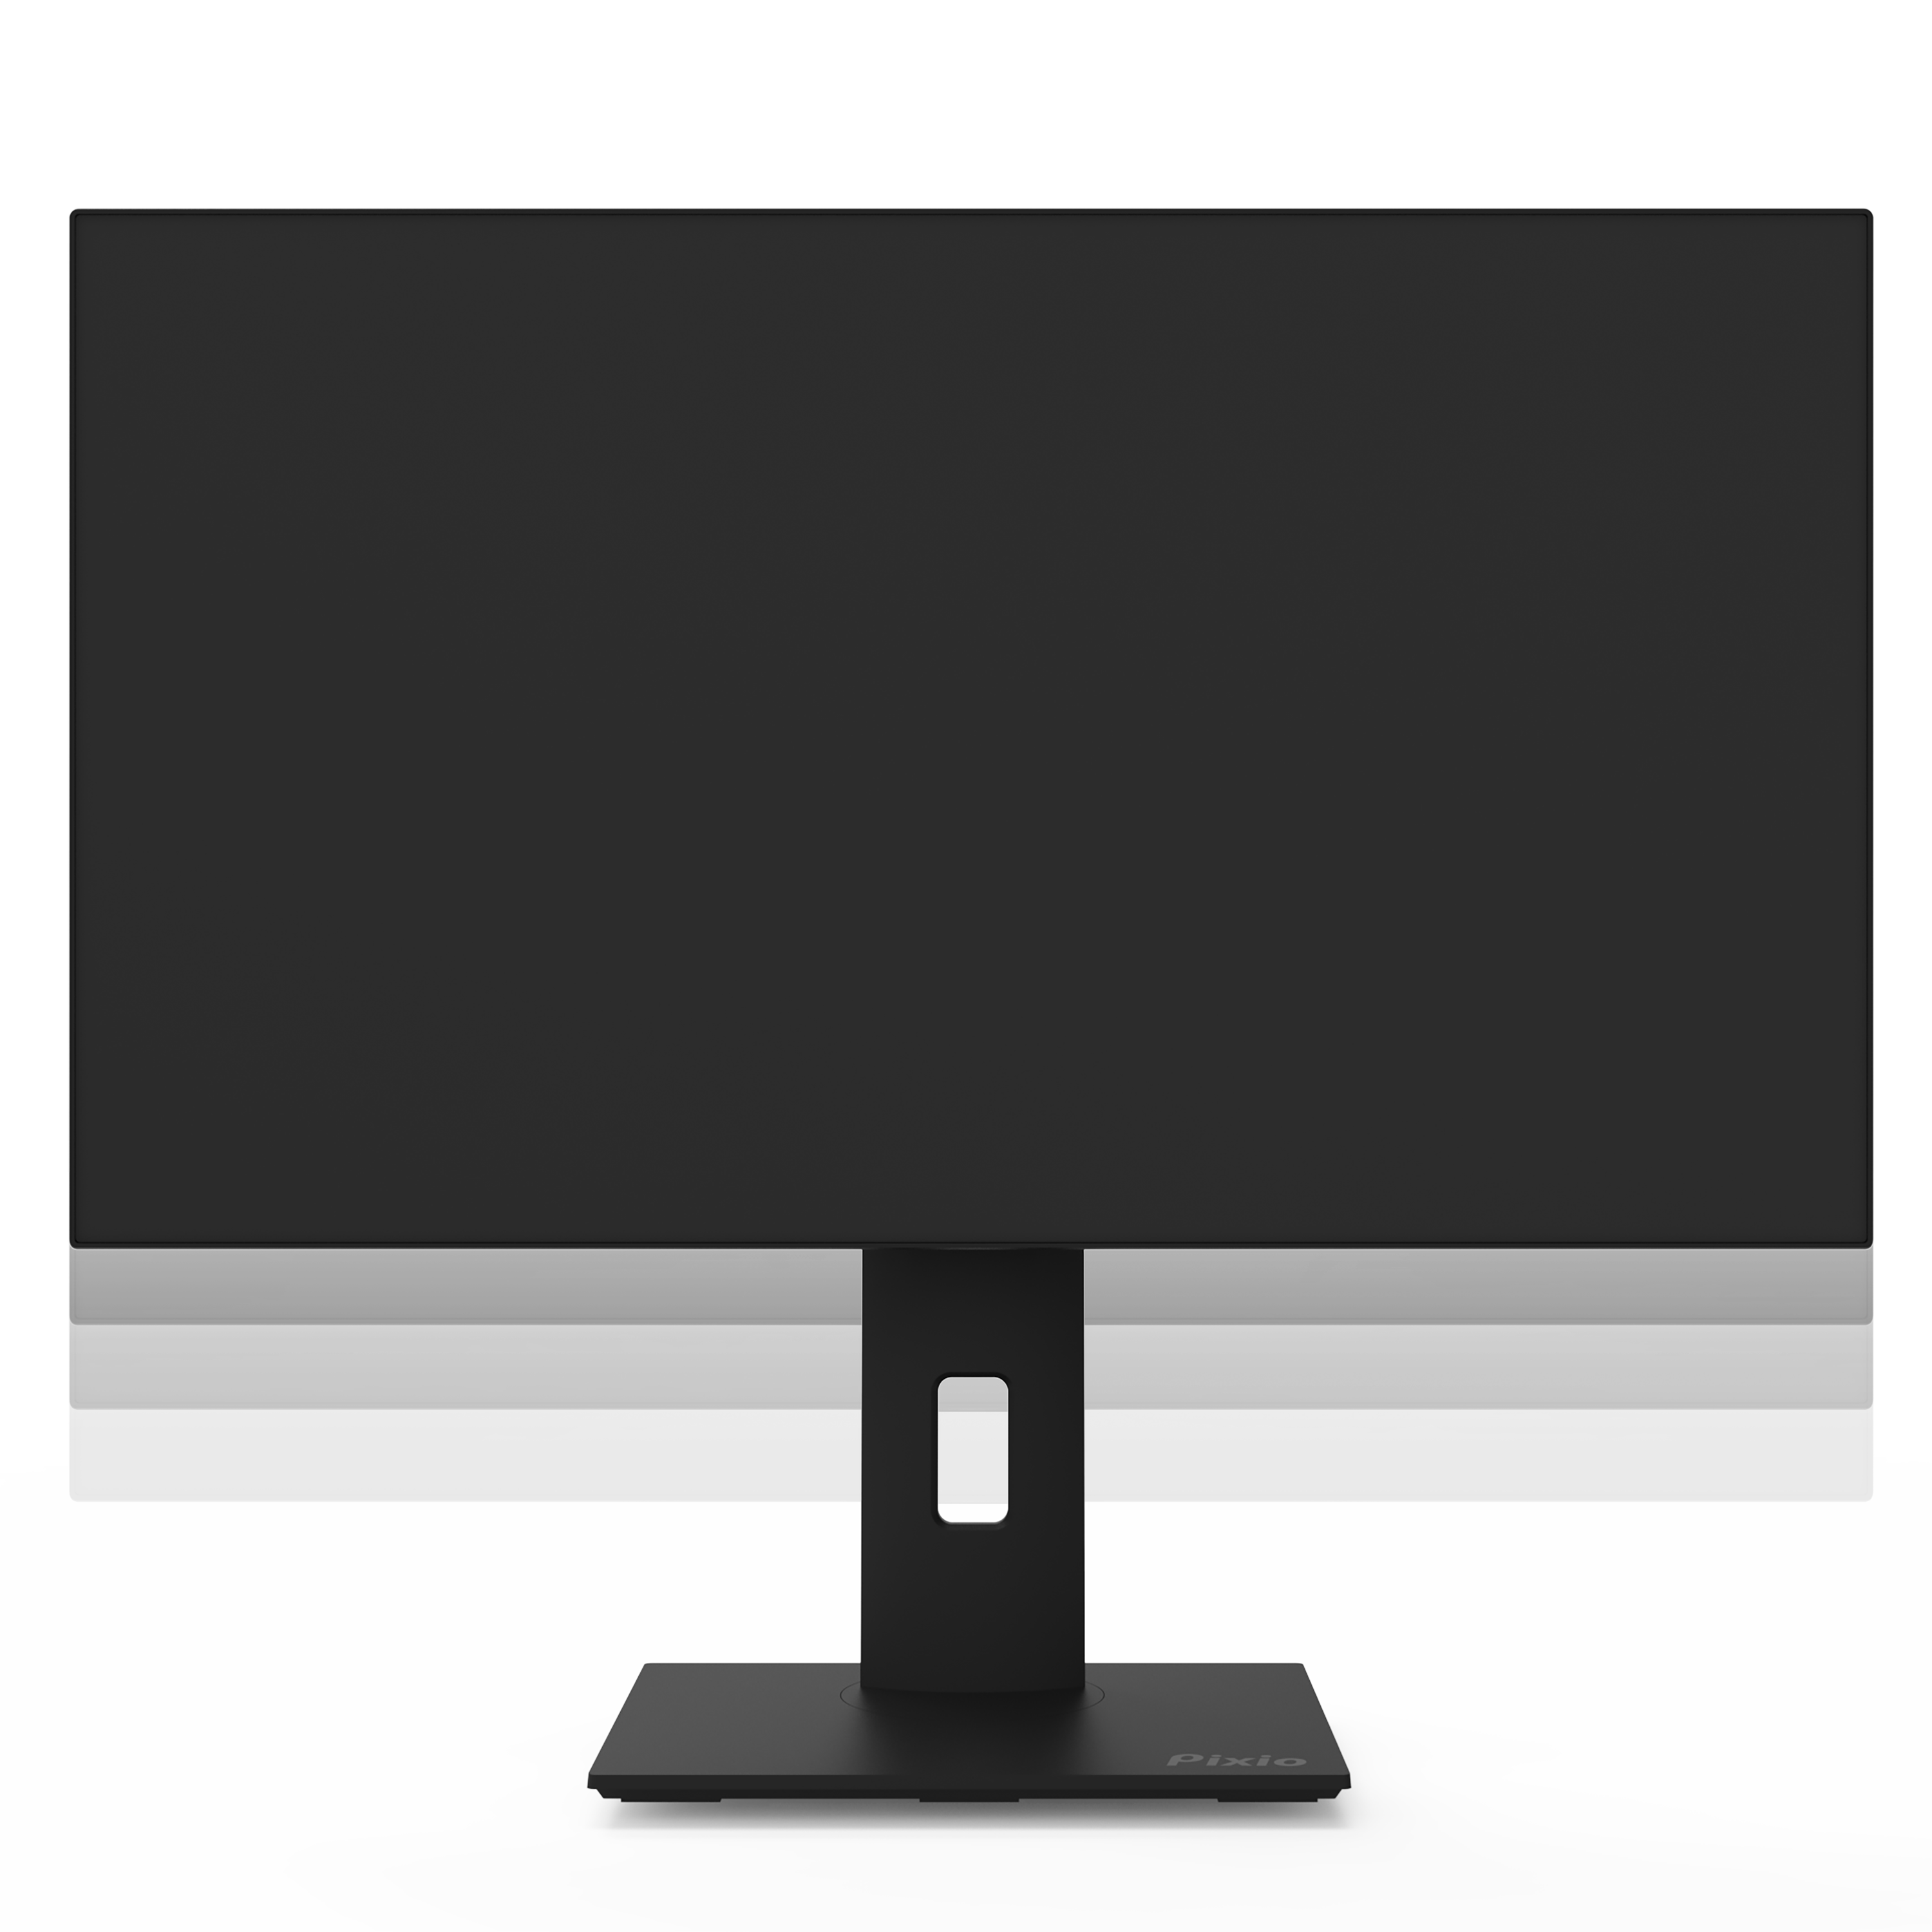 27-inch Office Monitor, FHD 100Hz Computer Monitor(1920x1080p), IPS HDR PC  Monitor with Low Blue Light Eye Care and Free Sync, 100x100mm VESA